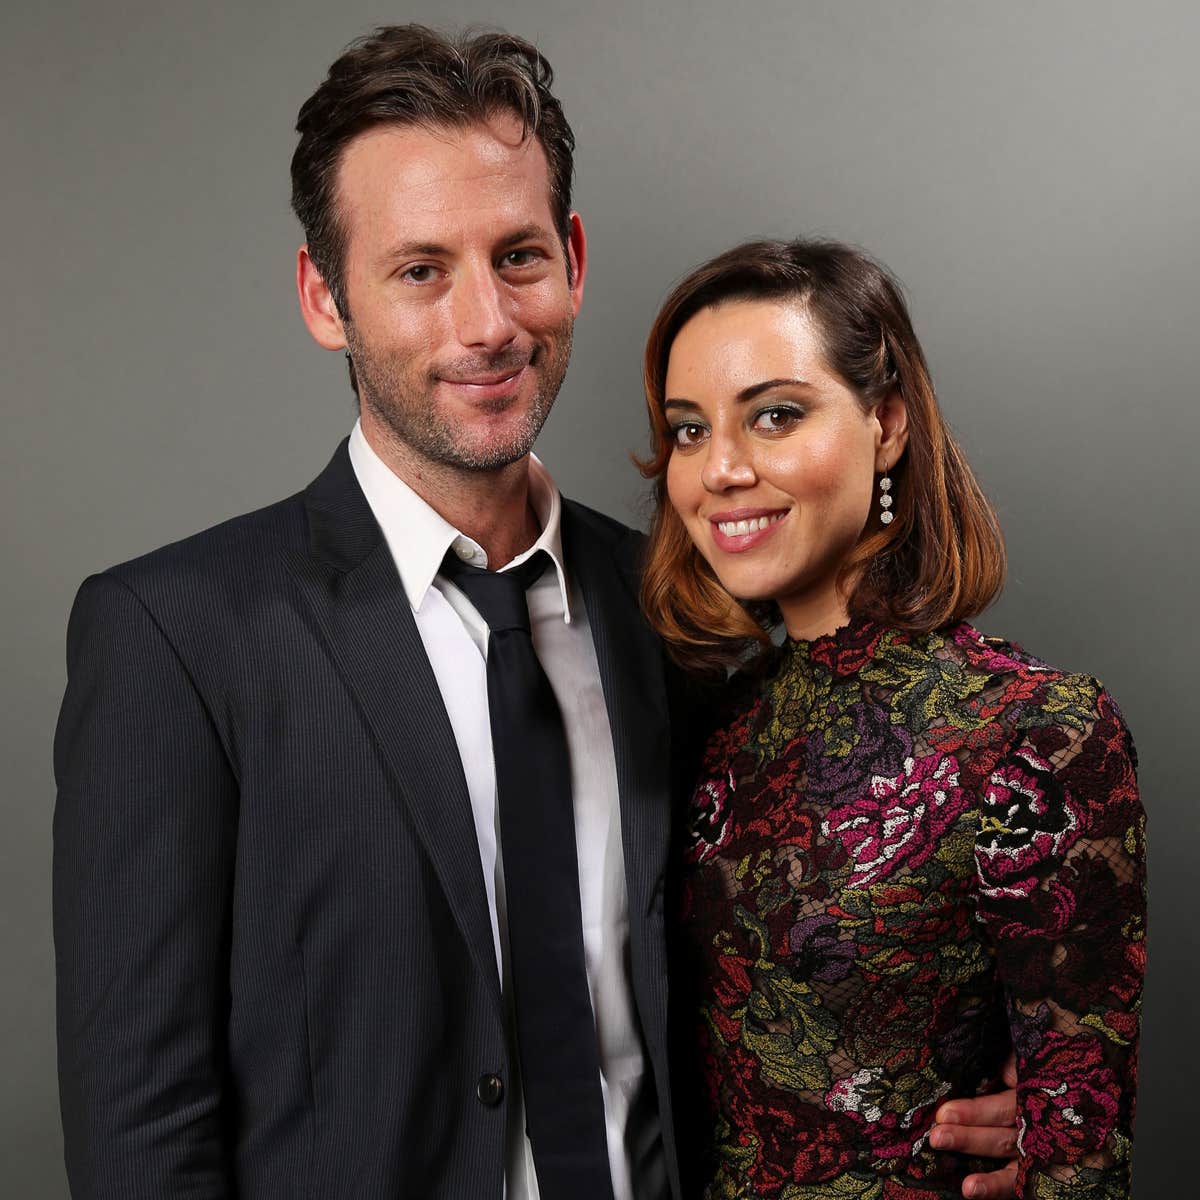 Aubrey Plaza Gets Married To Jeff Baena, Announcement